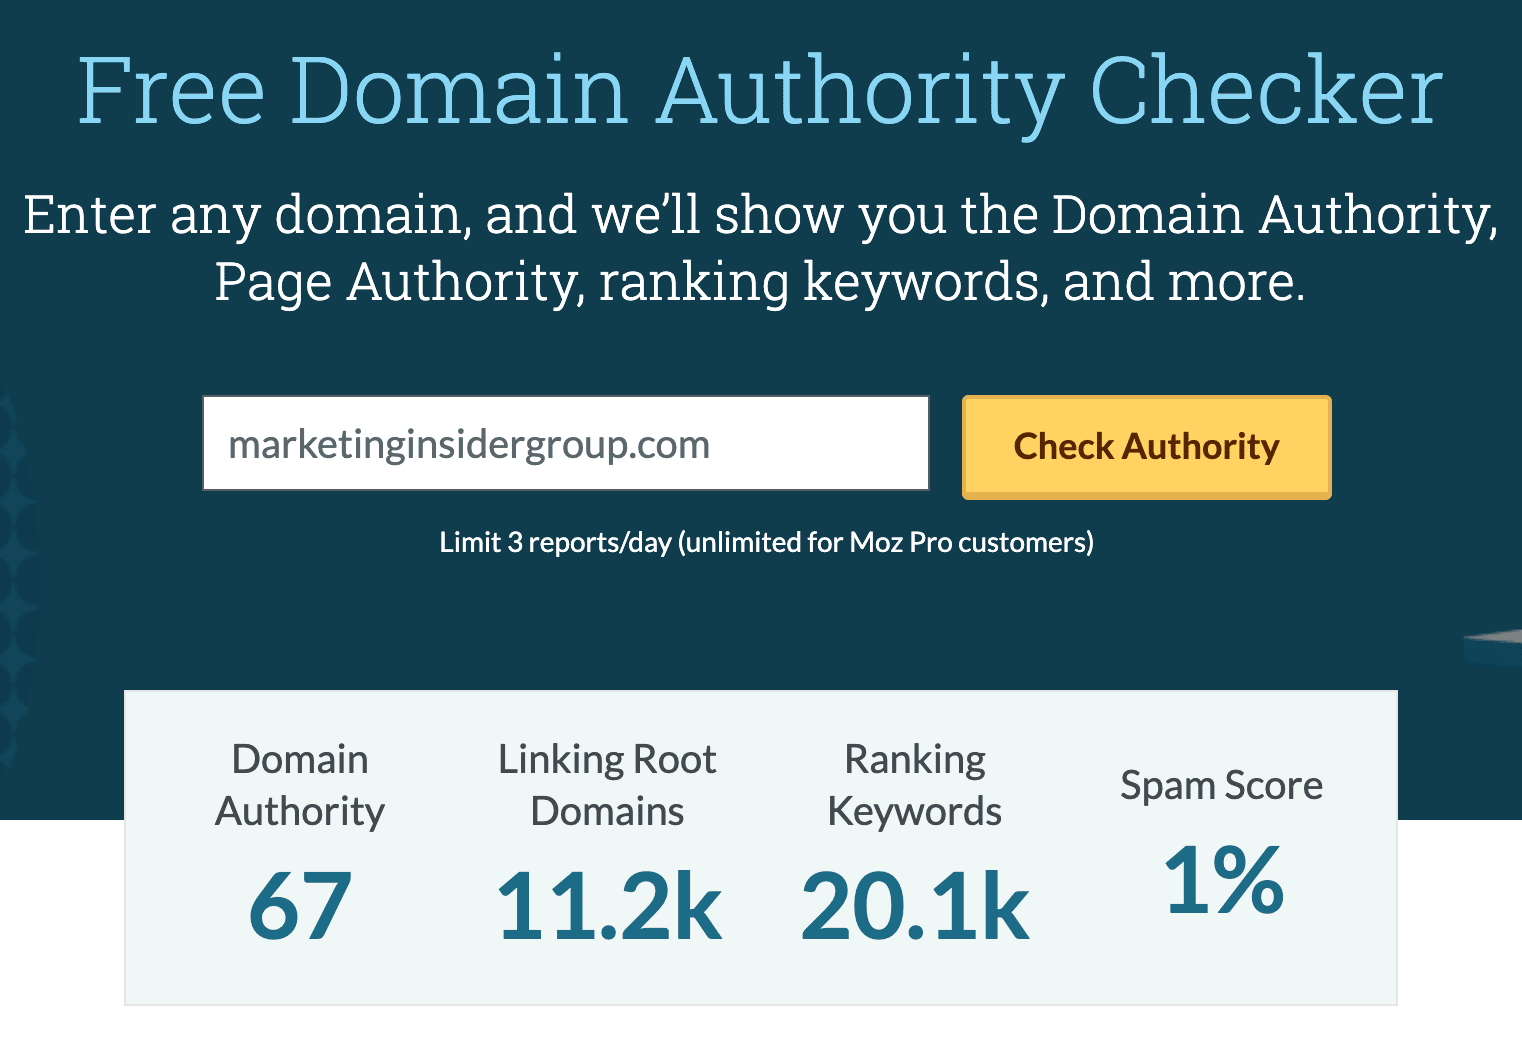 How to Check Domain Authority Score